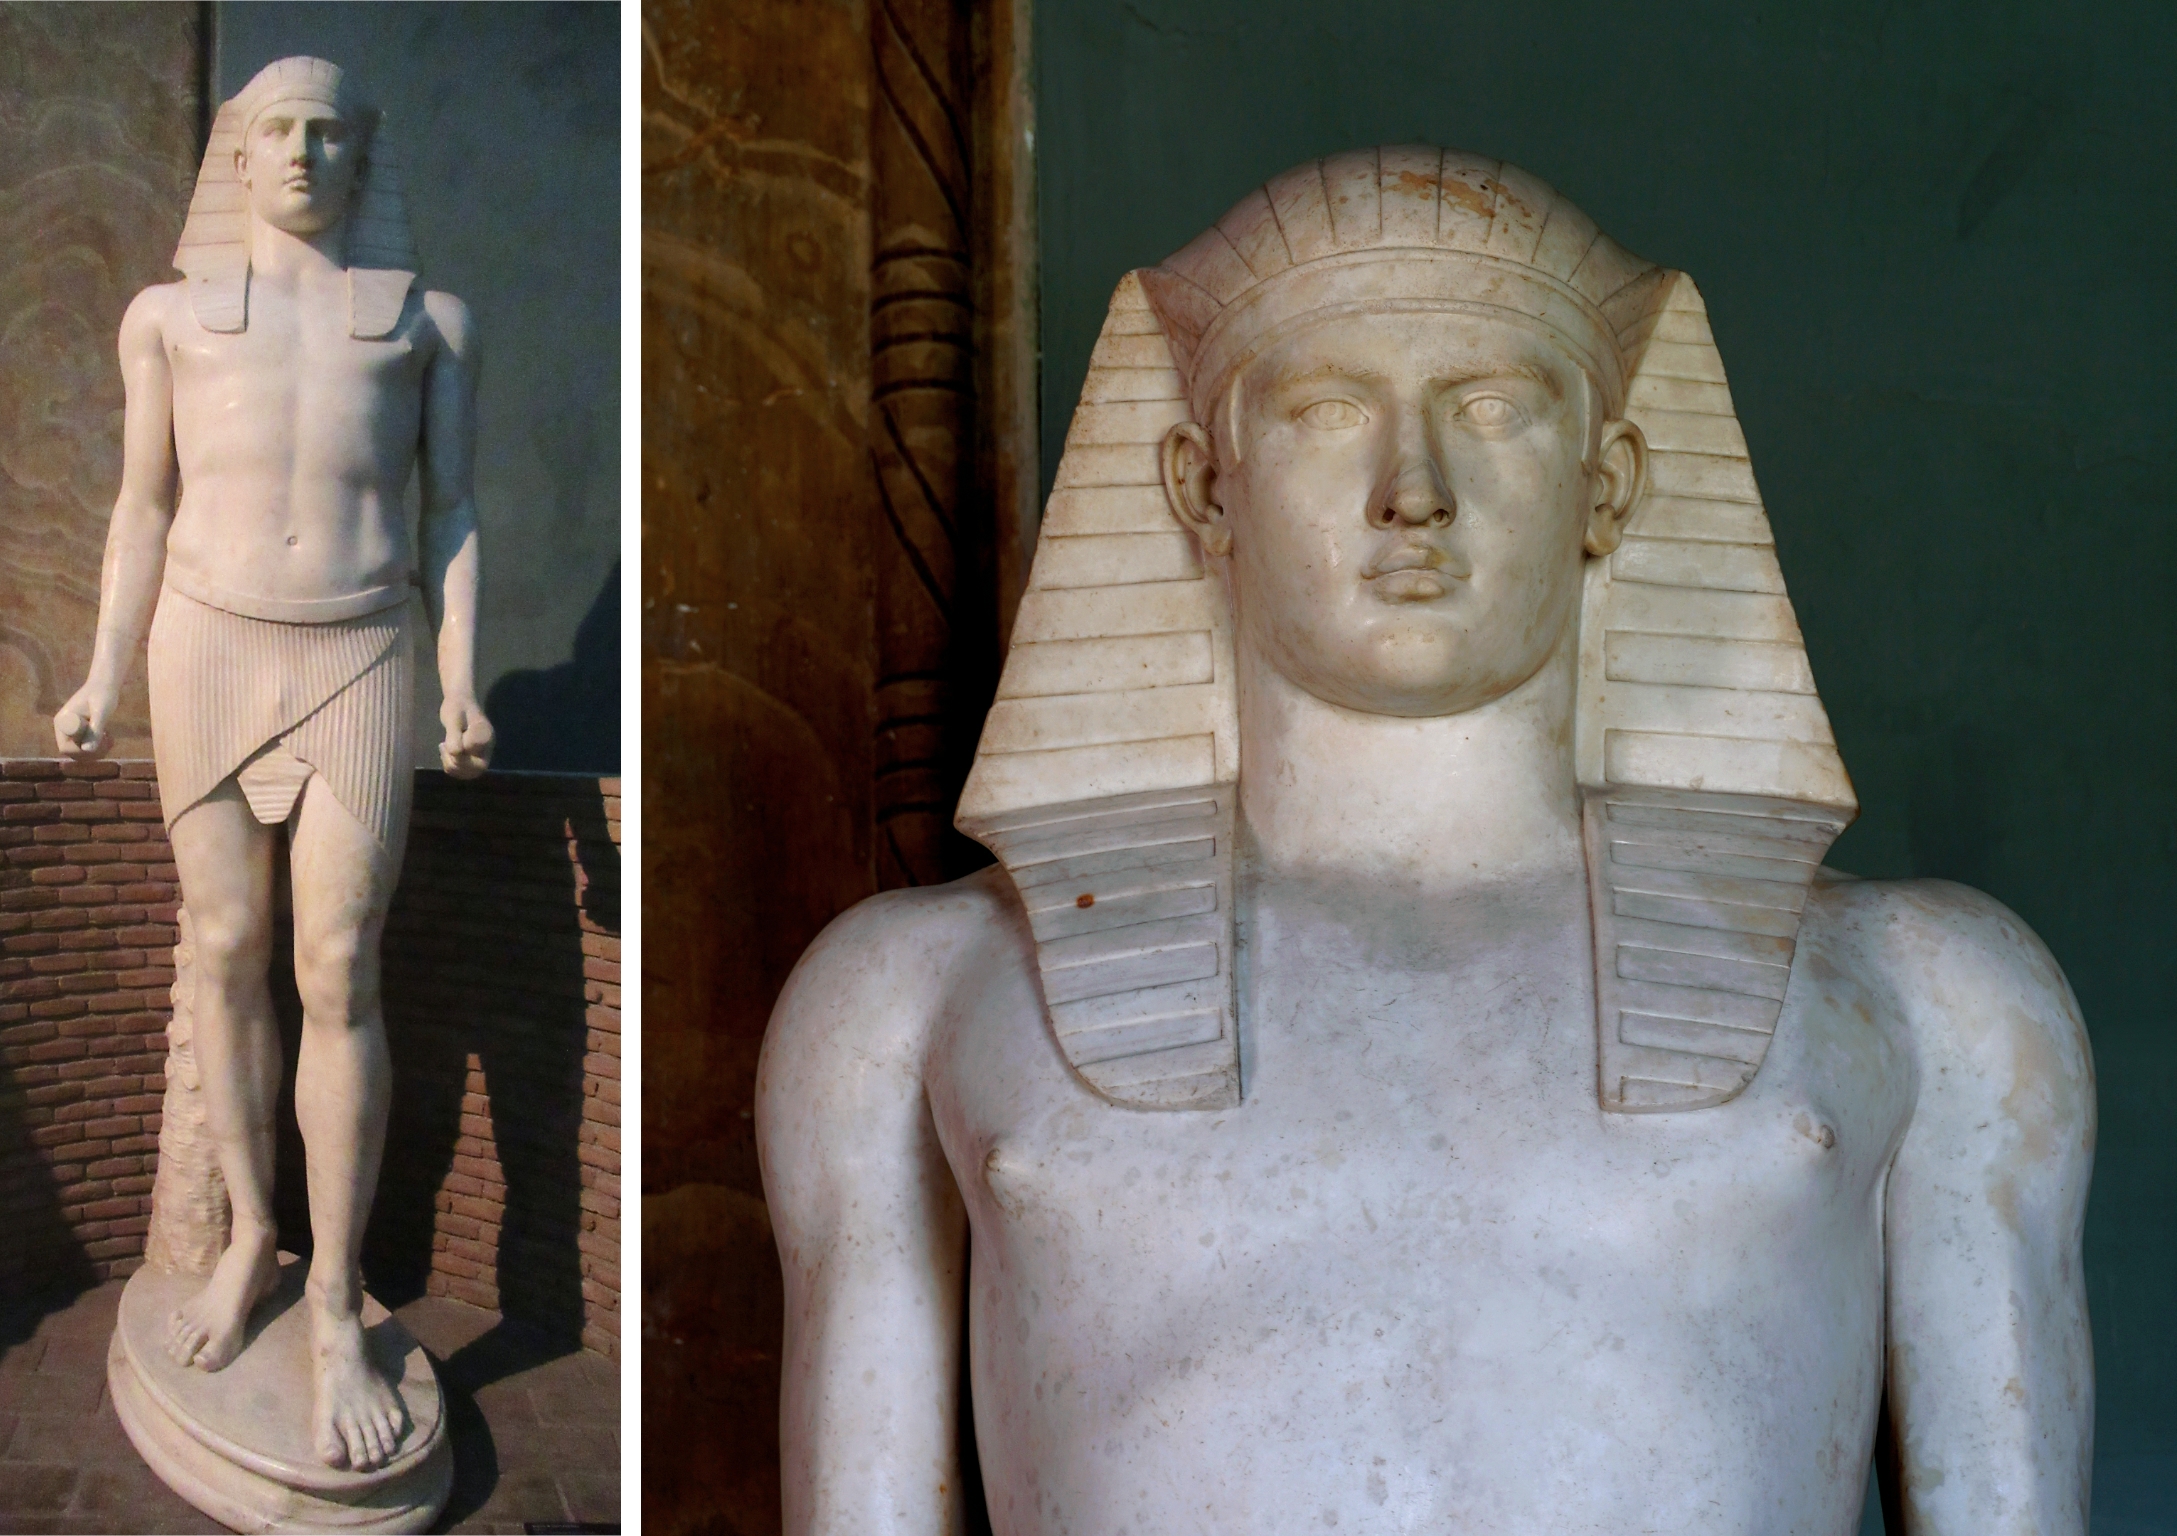 Statue of Osiris-Antinous, from Hadrian's Villa at Tivoli, c. 135 C.E., Parian marble, 241 x 77 x 79 cm (Vatican Museums; left photo: Damien Tournay, CC BY-SA 2.0; right photo: Slices of Light, CC BY-NC-ND 2.0)